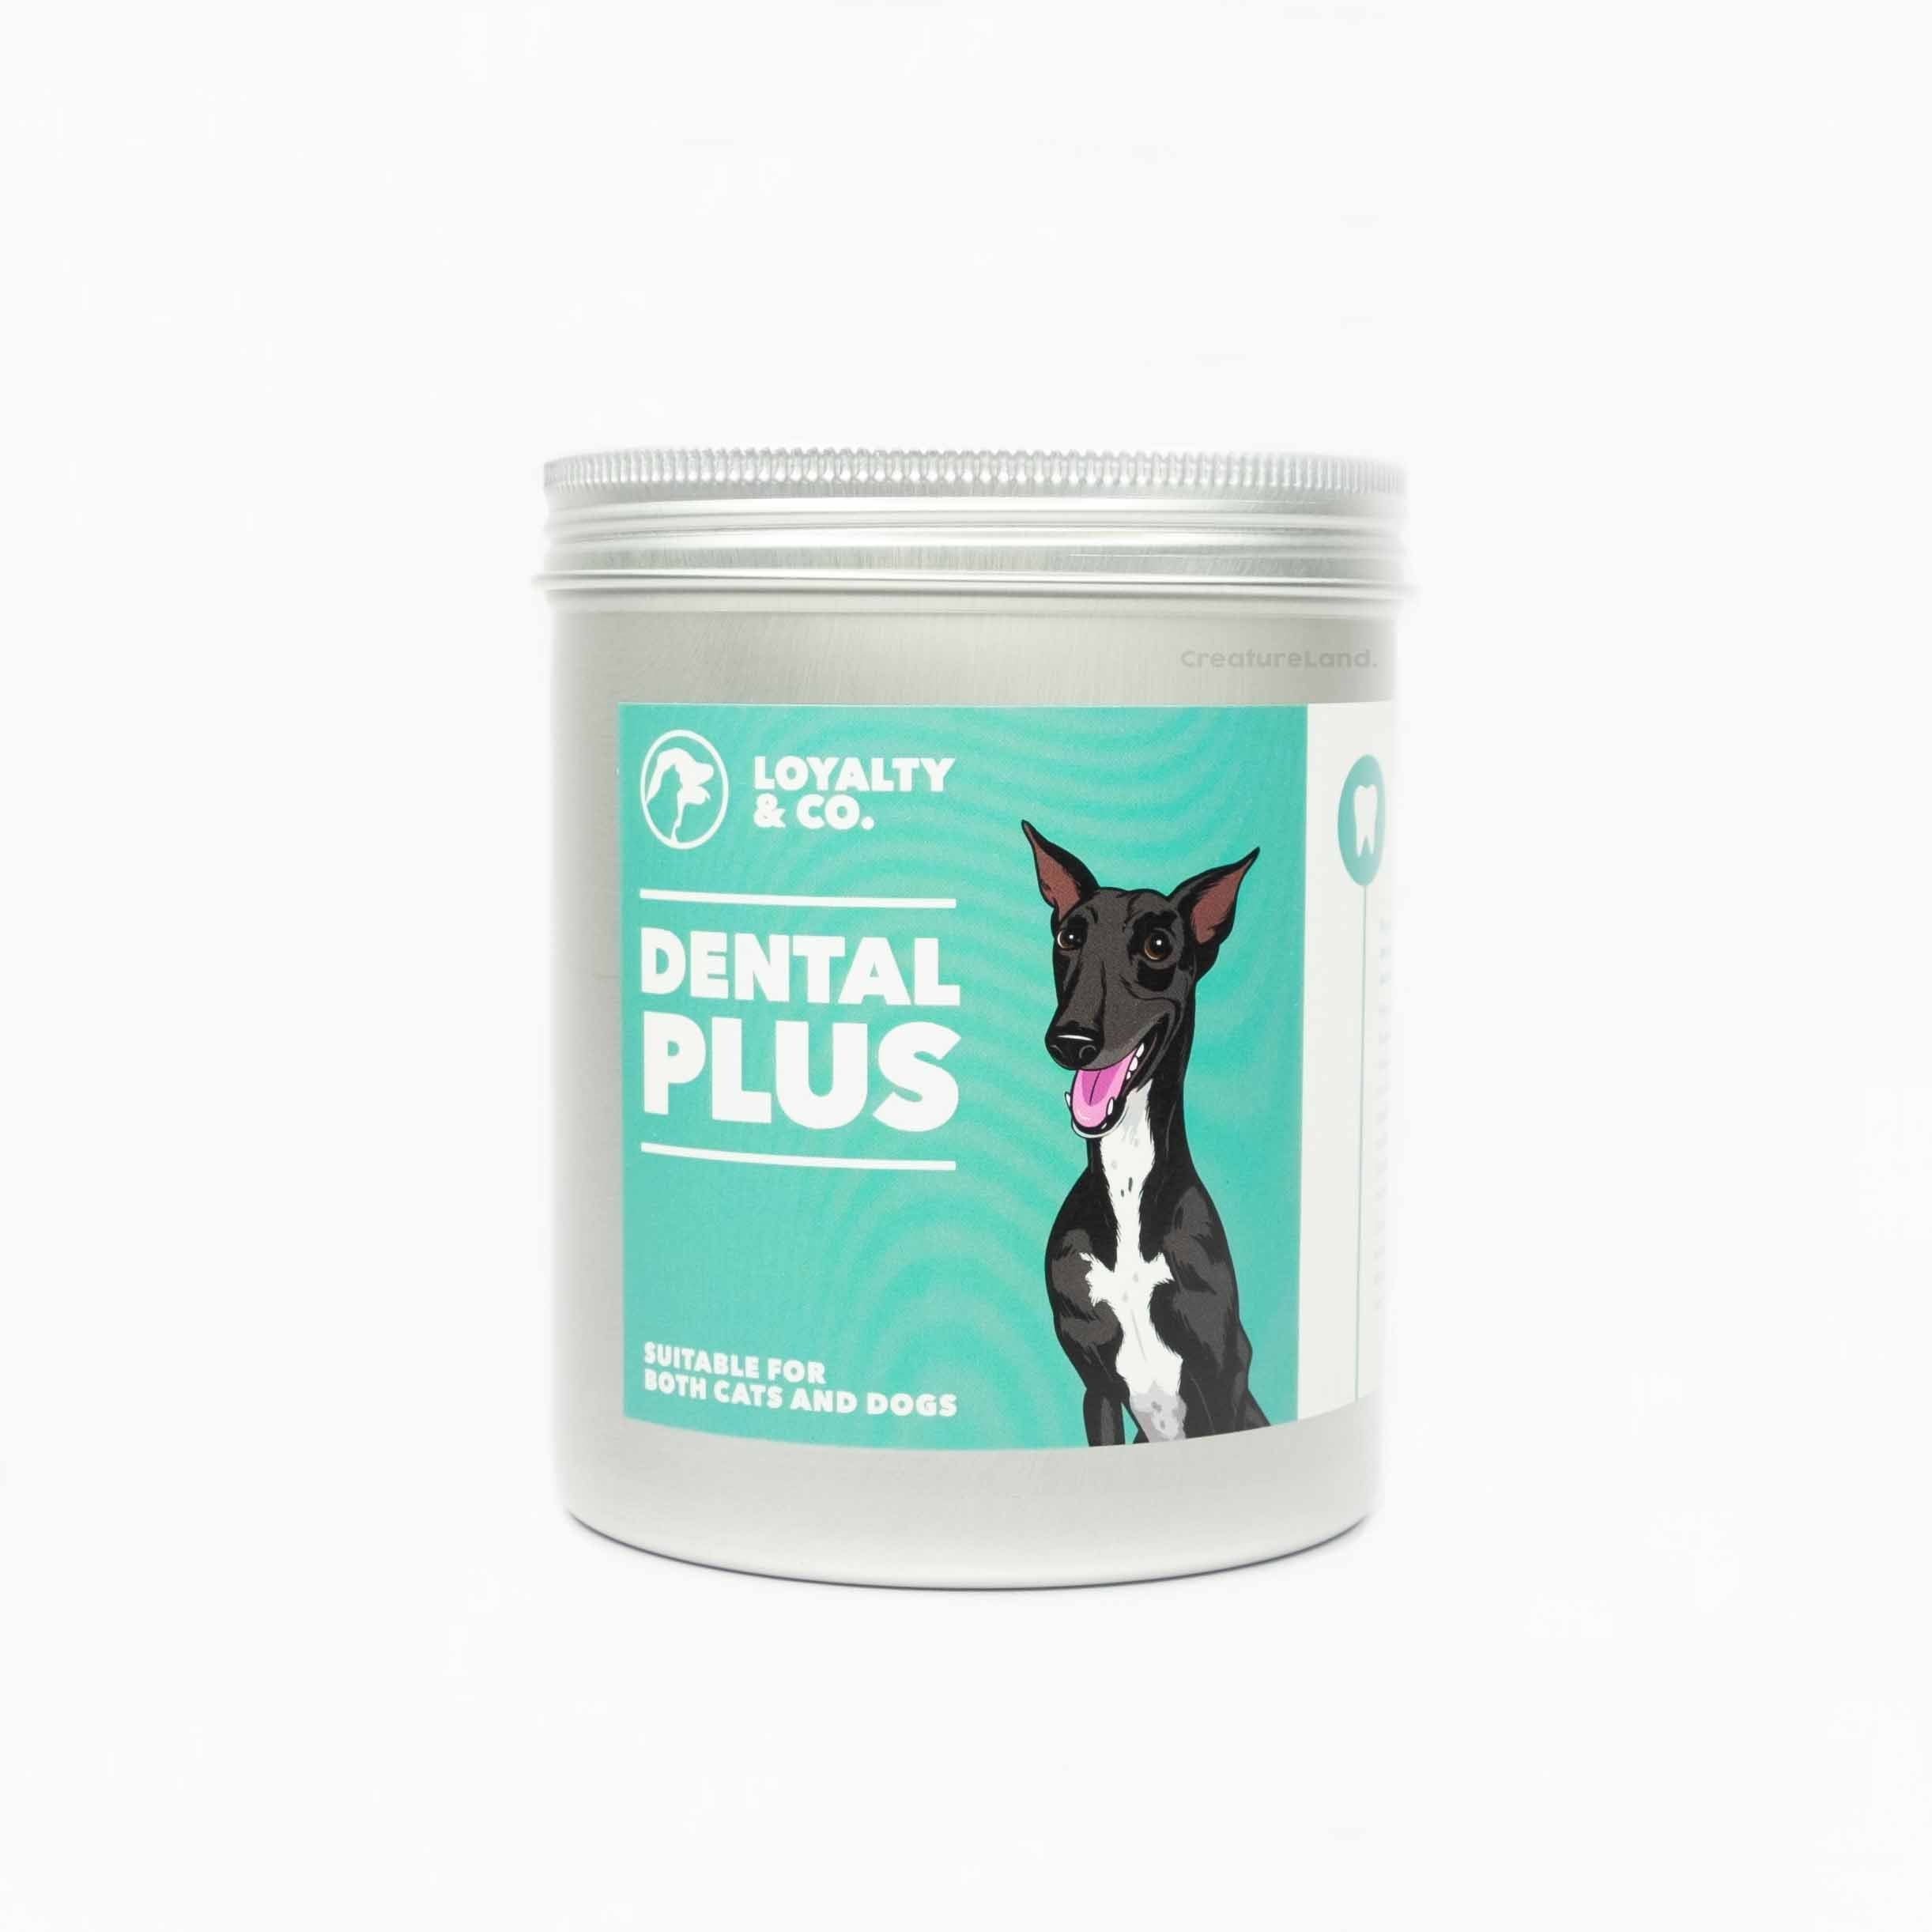 Loyalty & Co. Loyalty & Co. Dental Plus For Cats & Dogs - CreatureLand